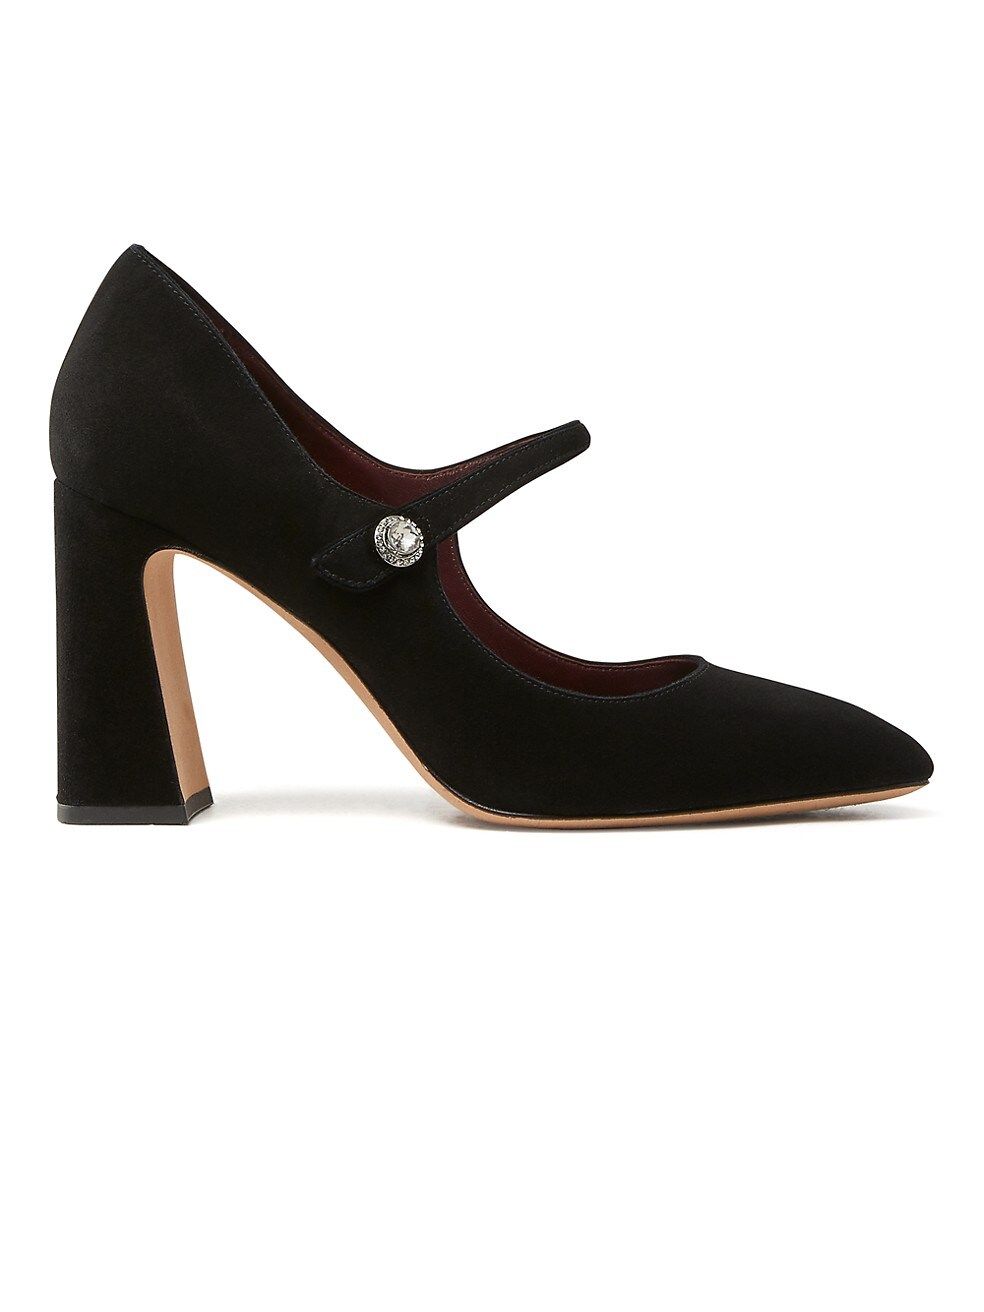 kate spade new york Maren Suede Mary Jane Pumps | Saks Fifth Avenue